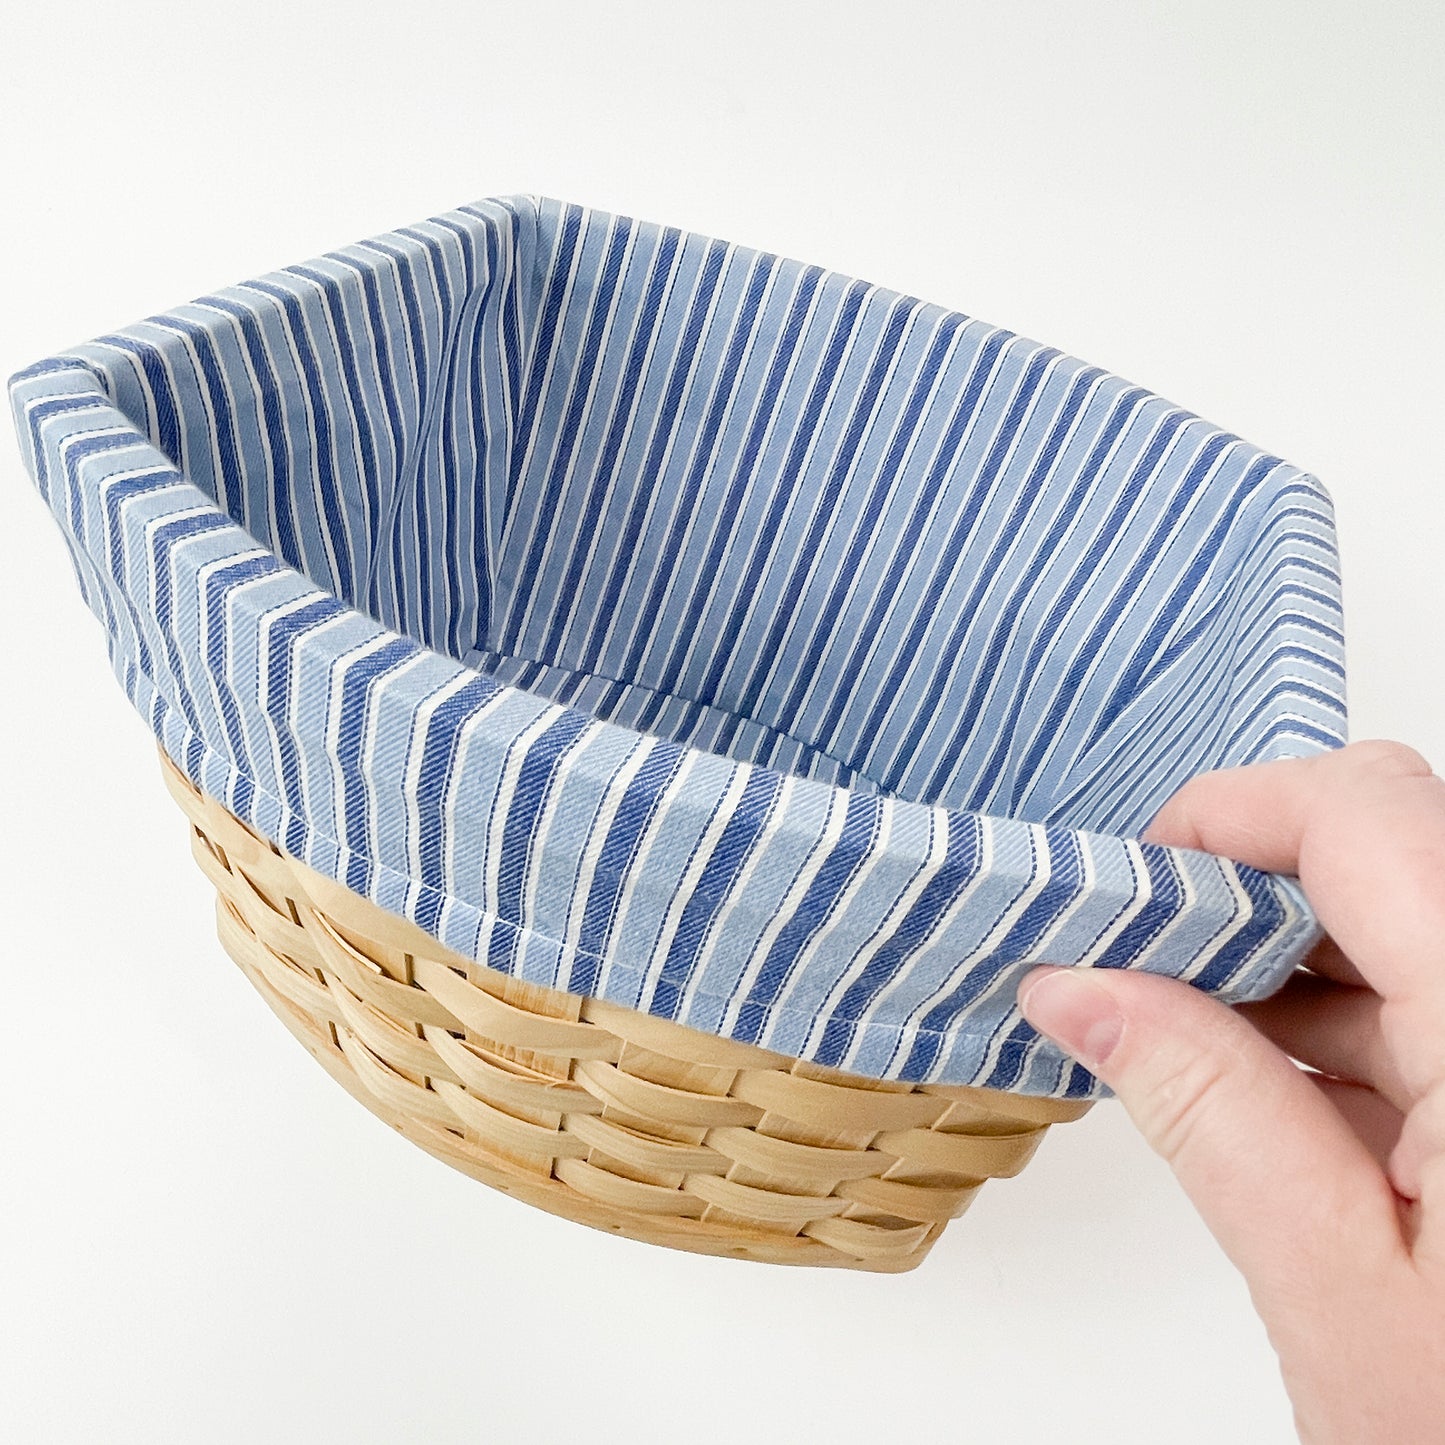 Wood chip woven basket with blue liner